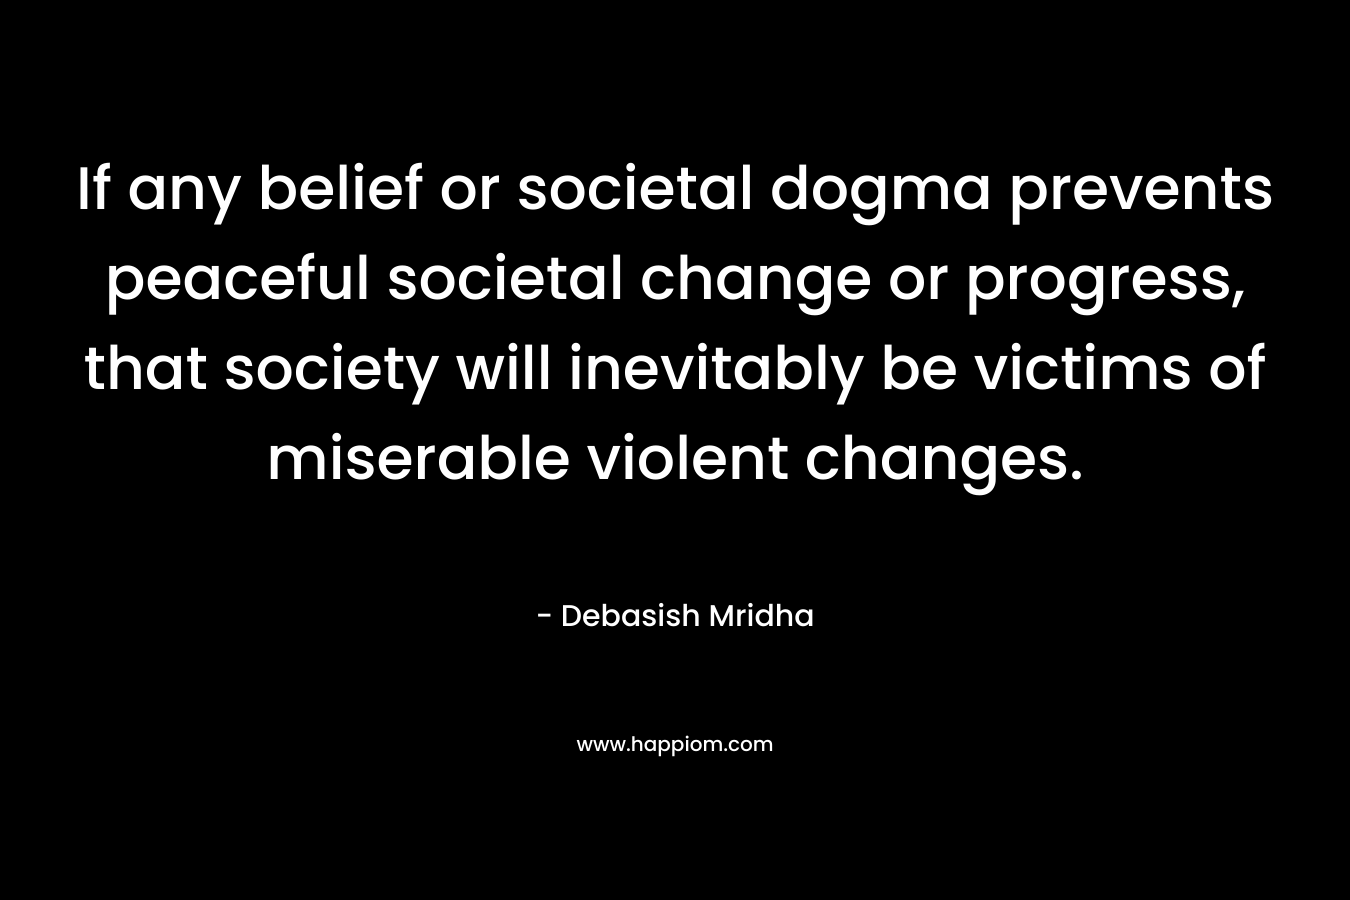 If any belief or societal dogma prevents peaceful societal change or progress, that society will inevitably be victims of miserable violent changes.